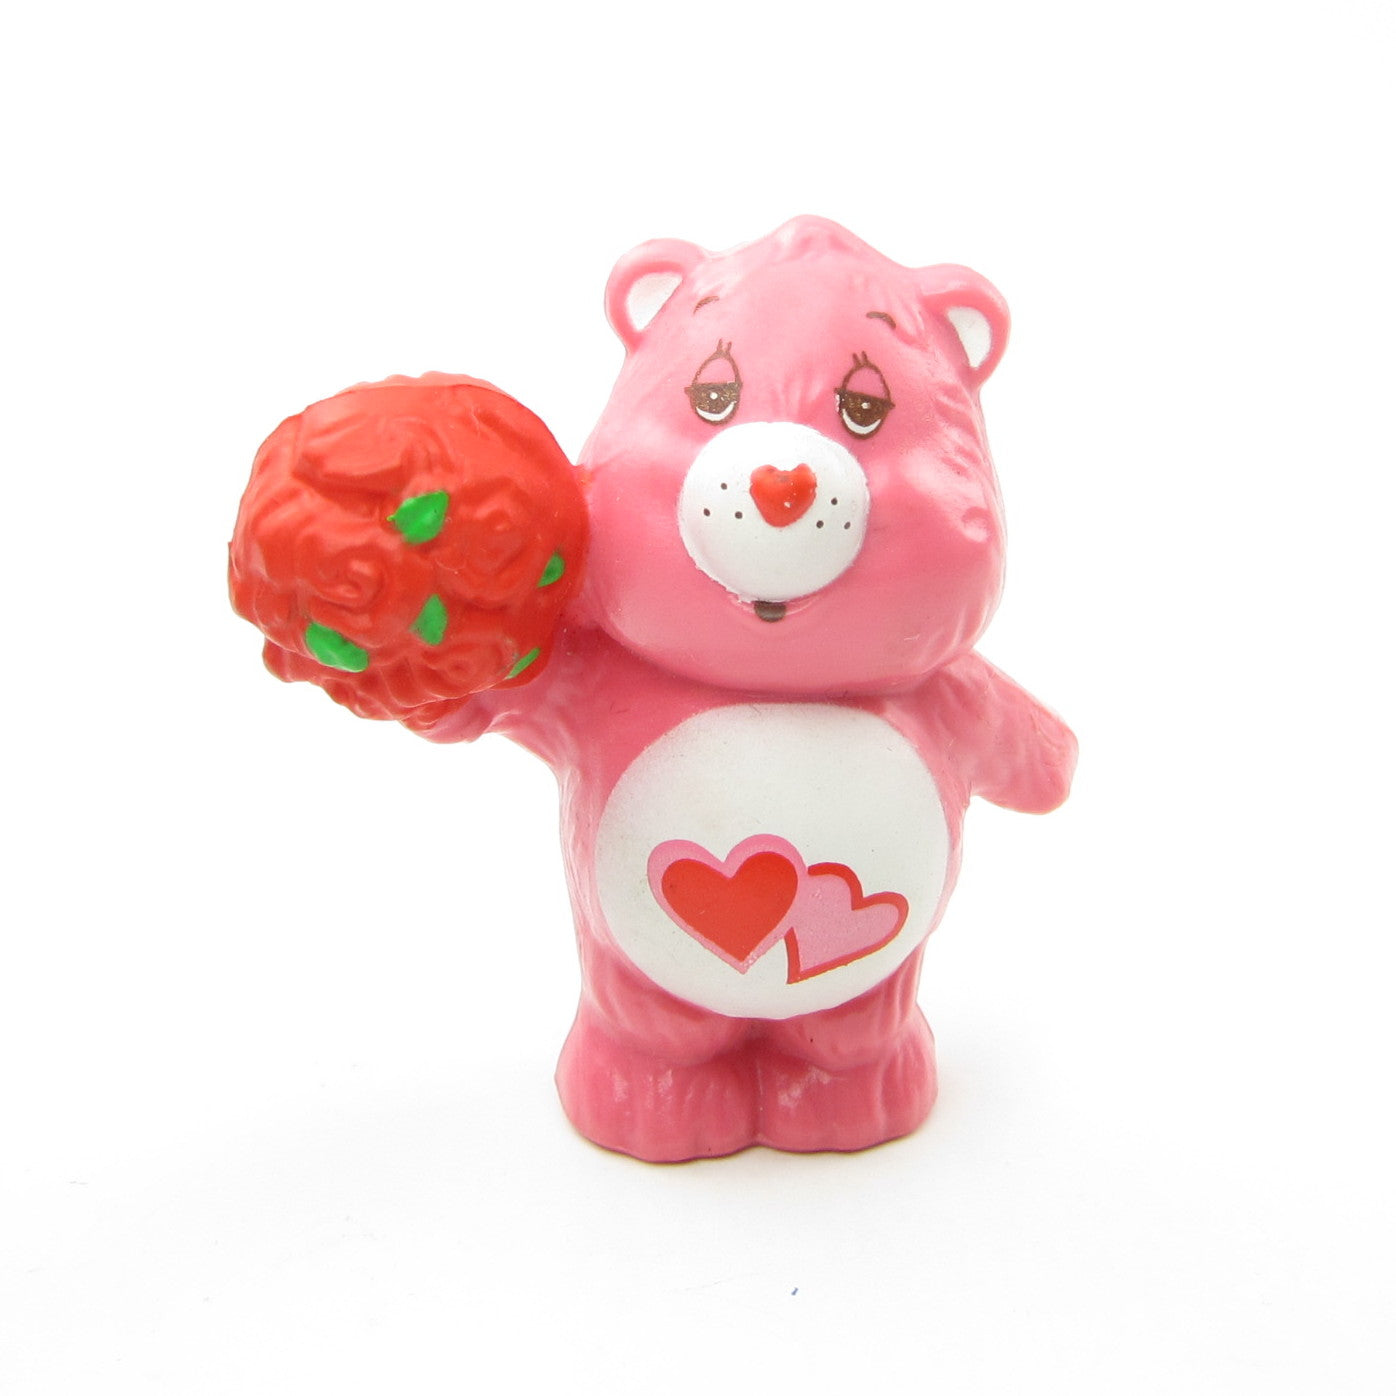 Love-A-Lot Bear offering a bunch of roses miniature Care Bears figurine